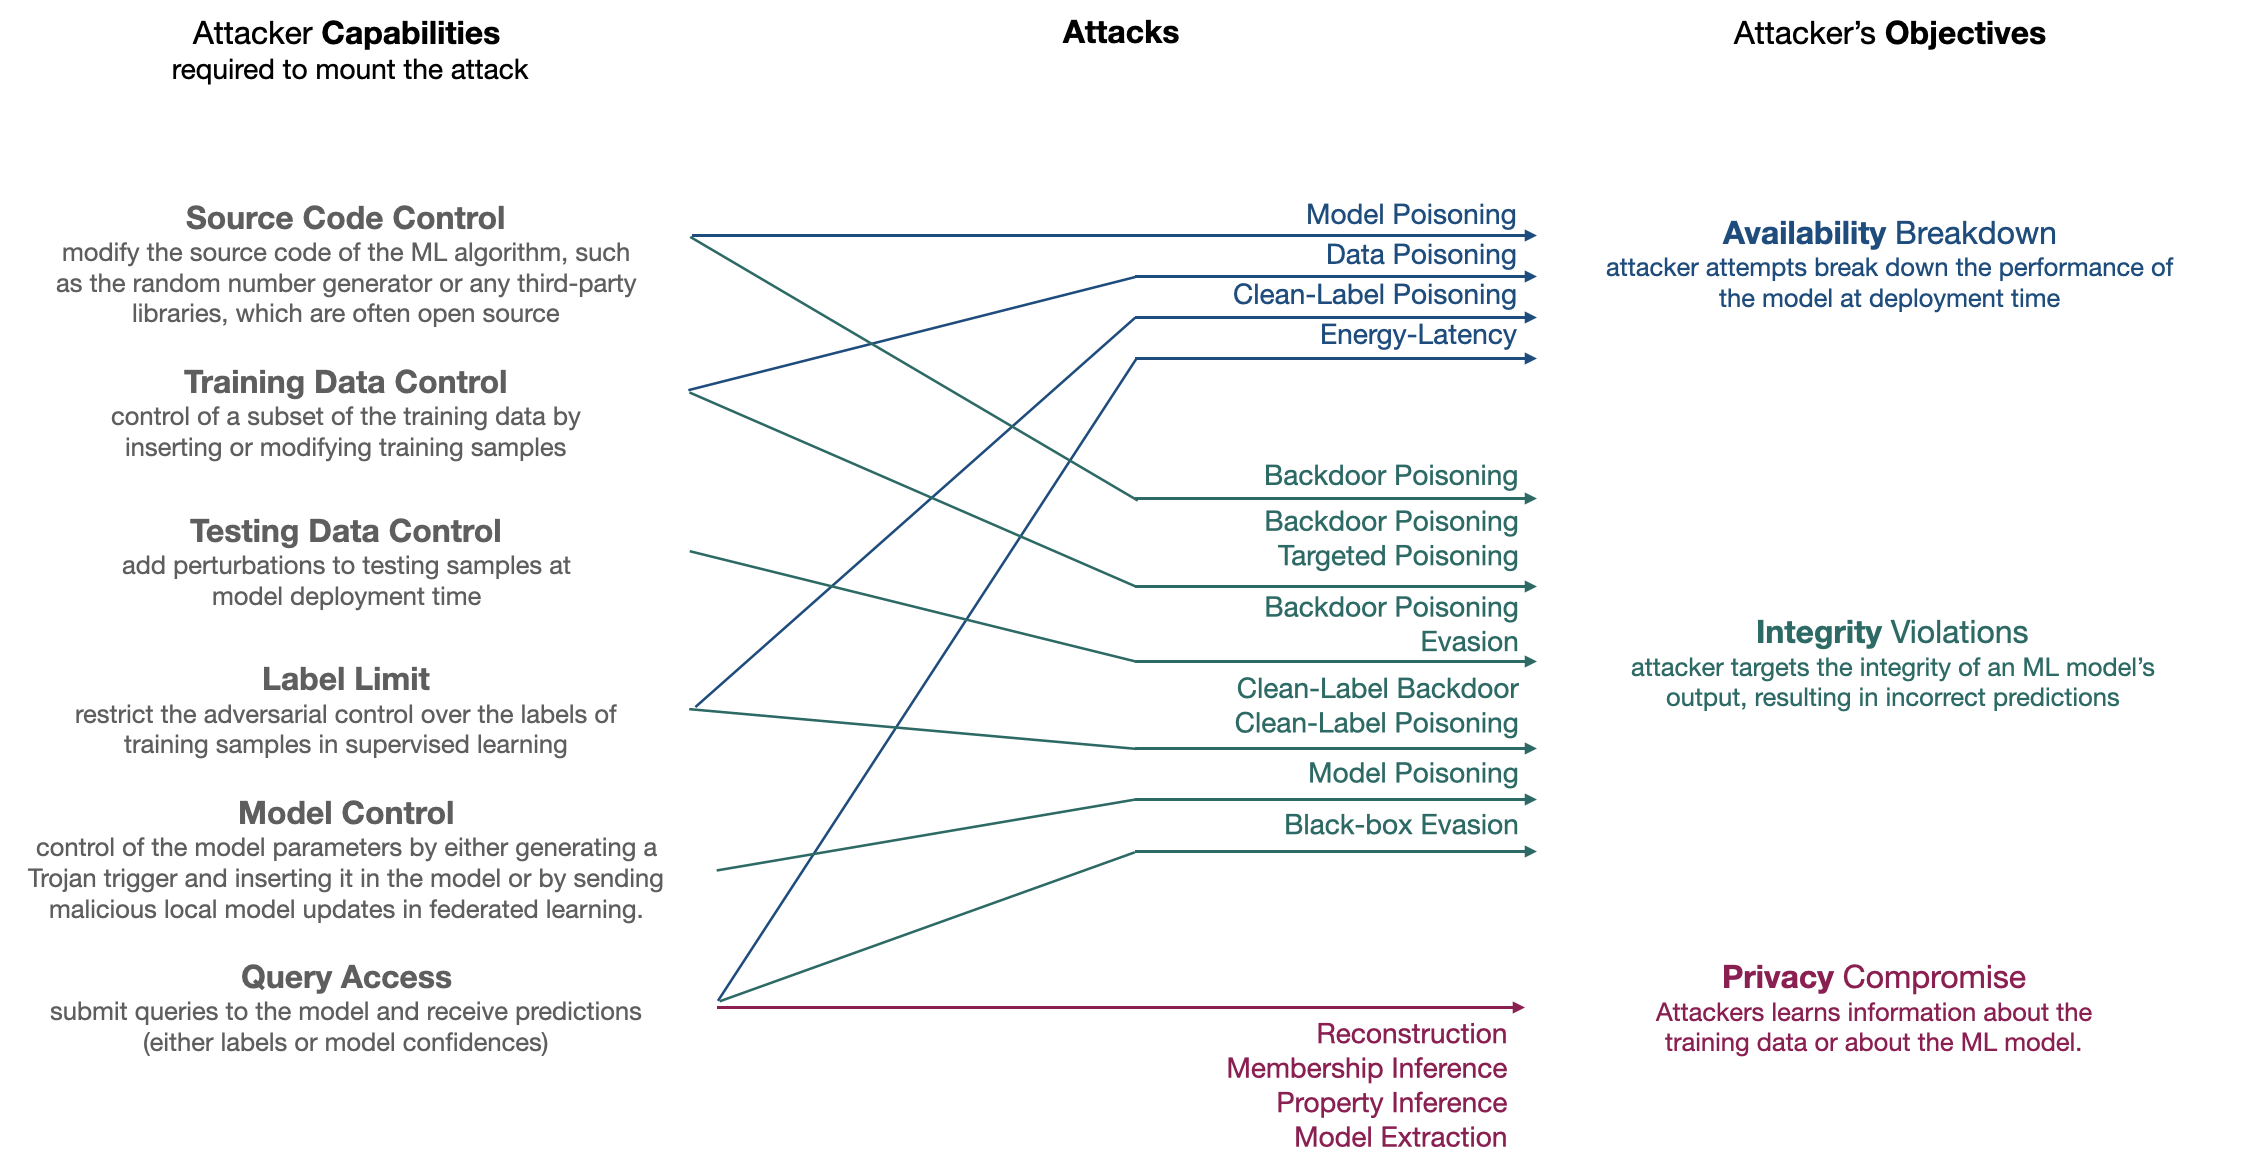 Reconstruction of Figure 1 from the ,,Taxonomy of attacks on Predictive AI systems’’ [7]